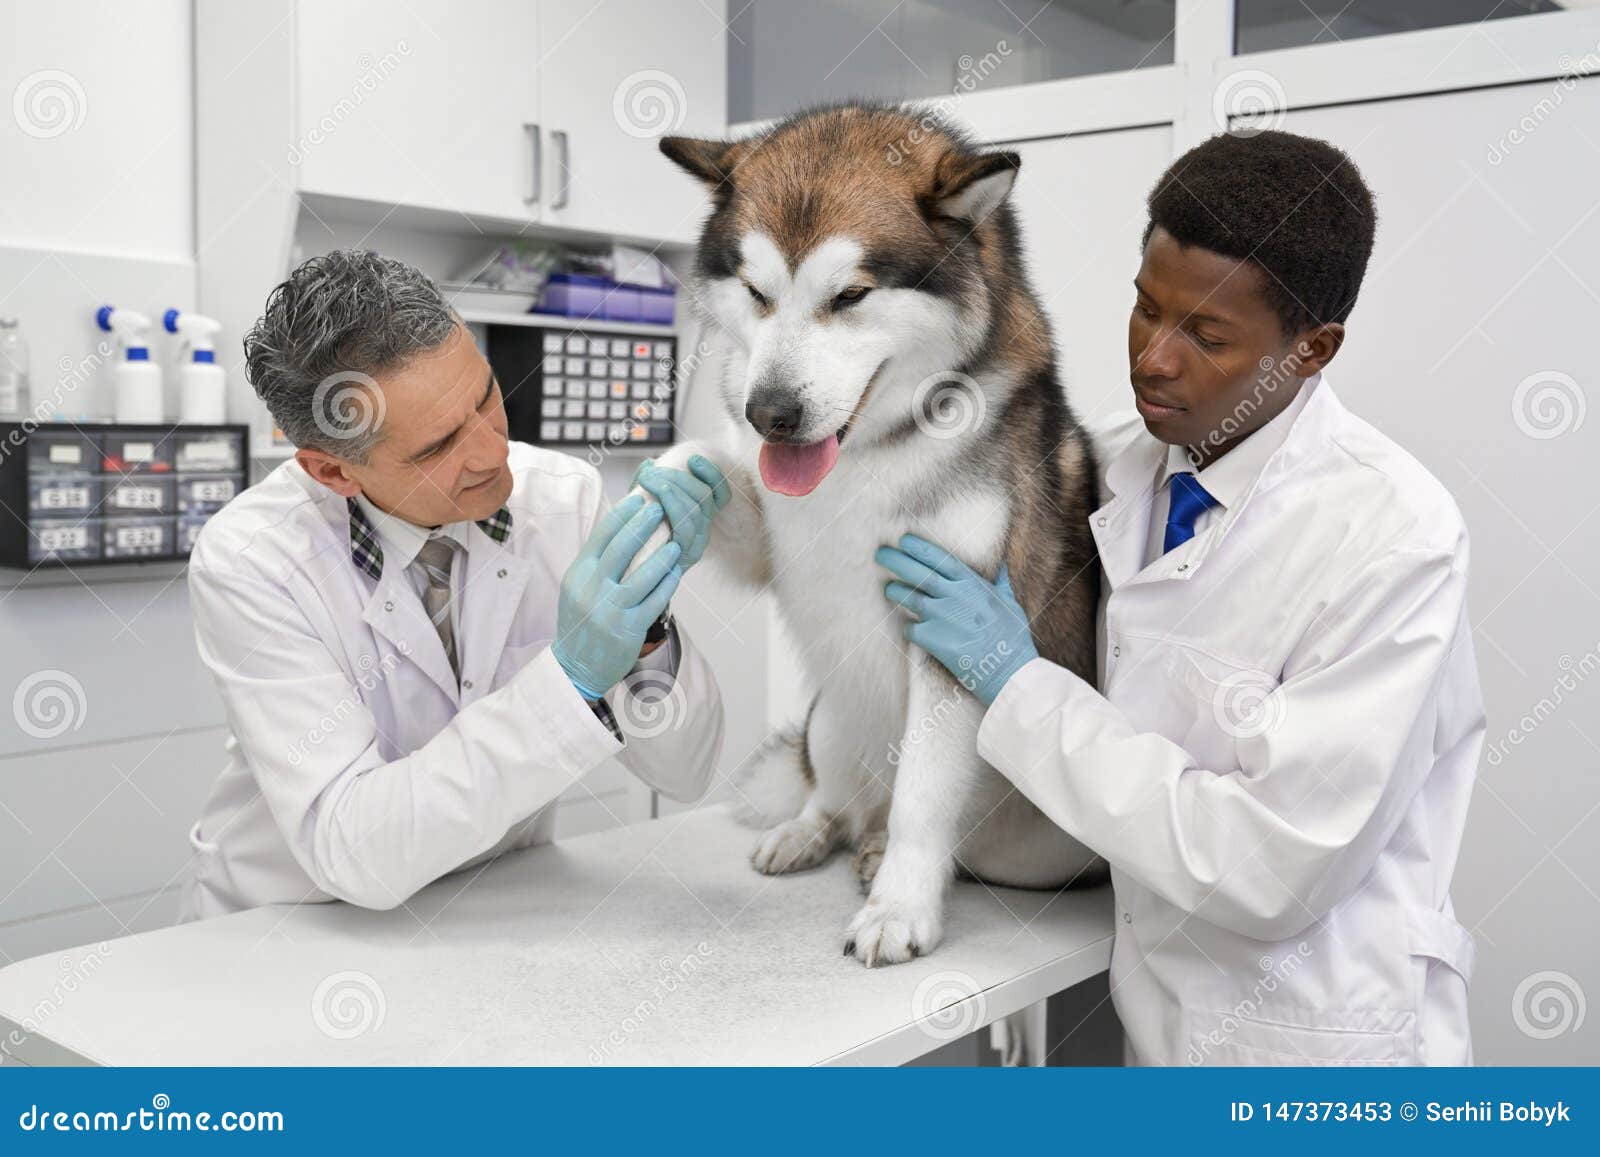 Vets Observing, Examining Paw of Malamute. Stock Image - Image of  beautiful, cute: 147373453